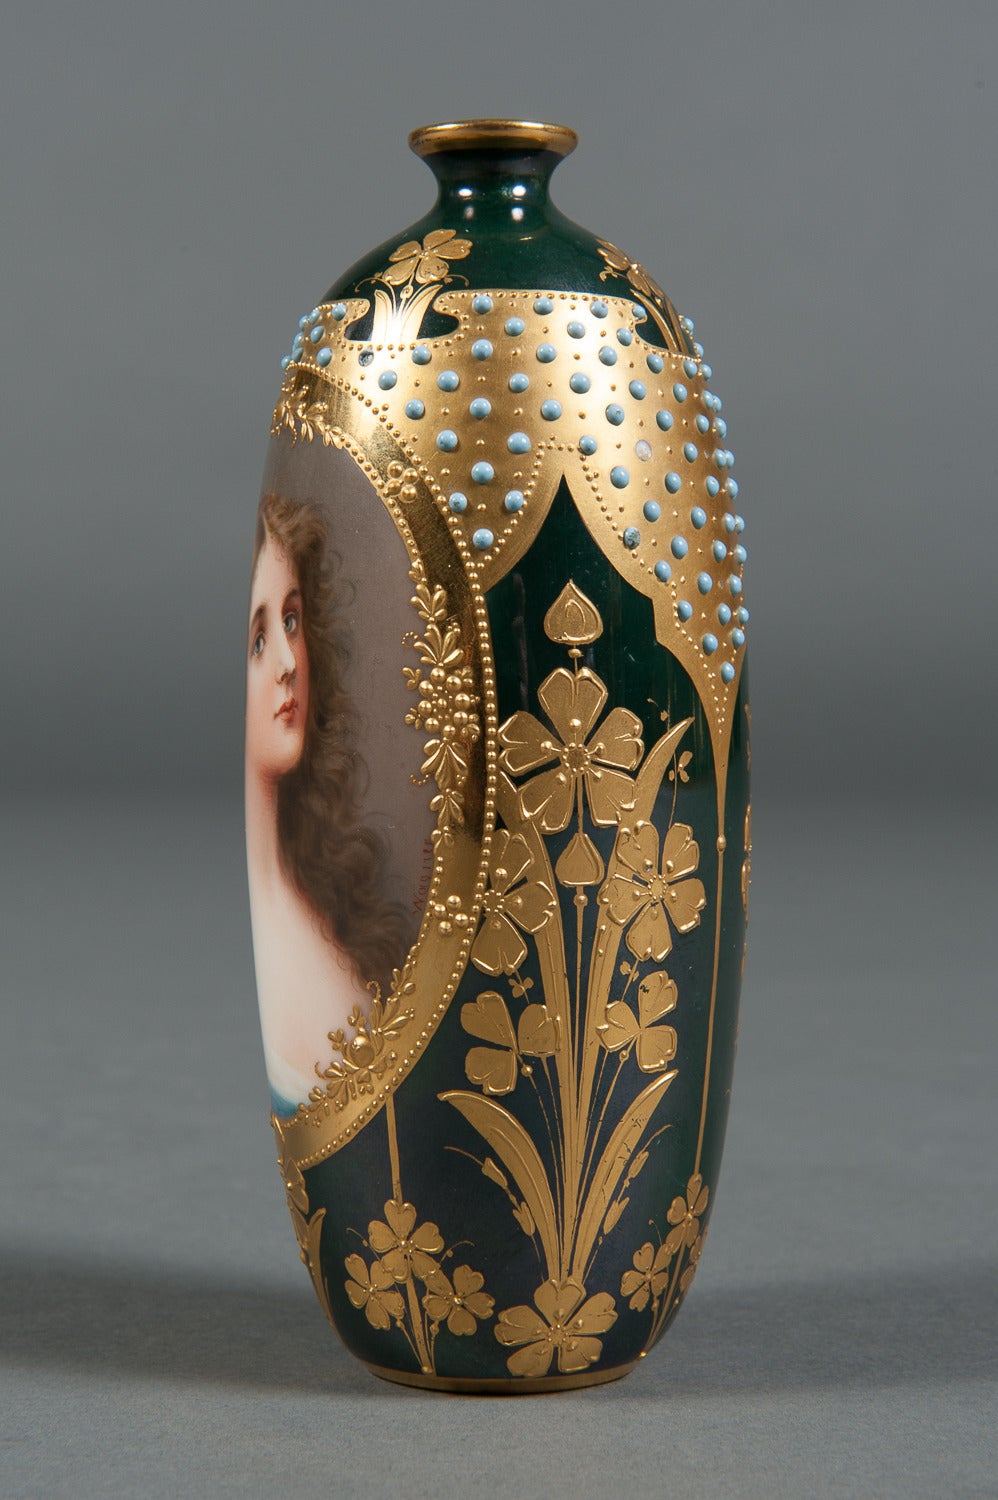 A Royal Vienna Style Hand Painted & Jeweled Porcelain Vase

Titled: 